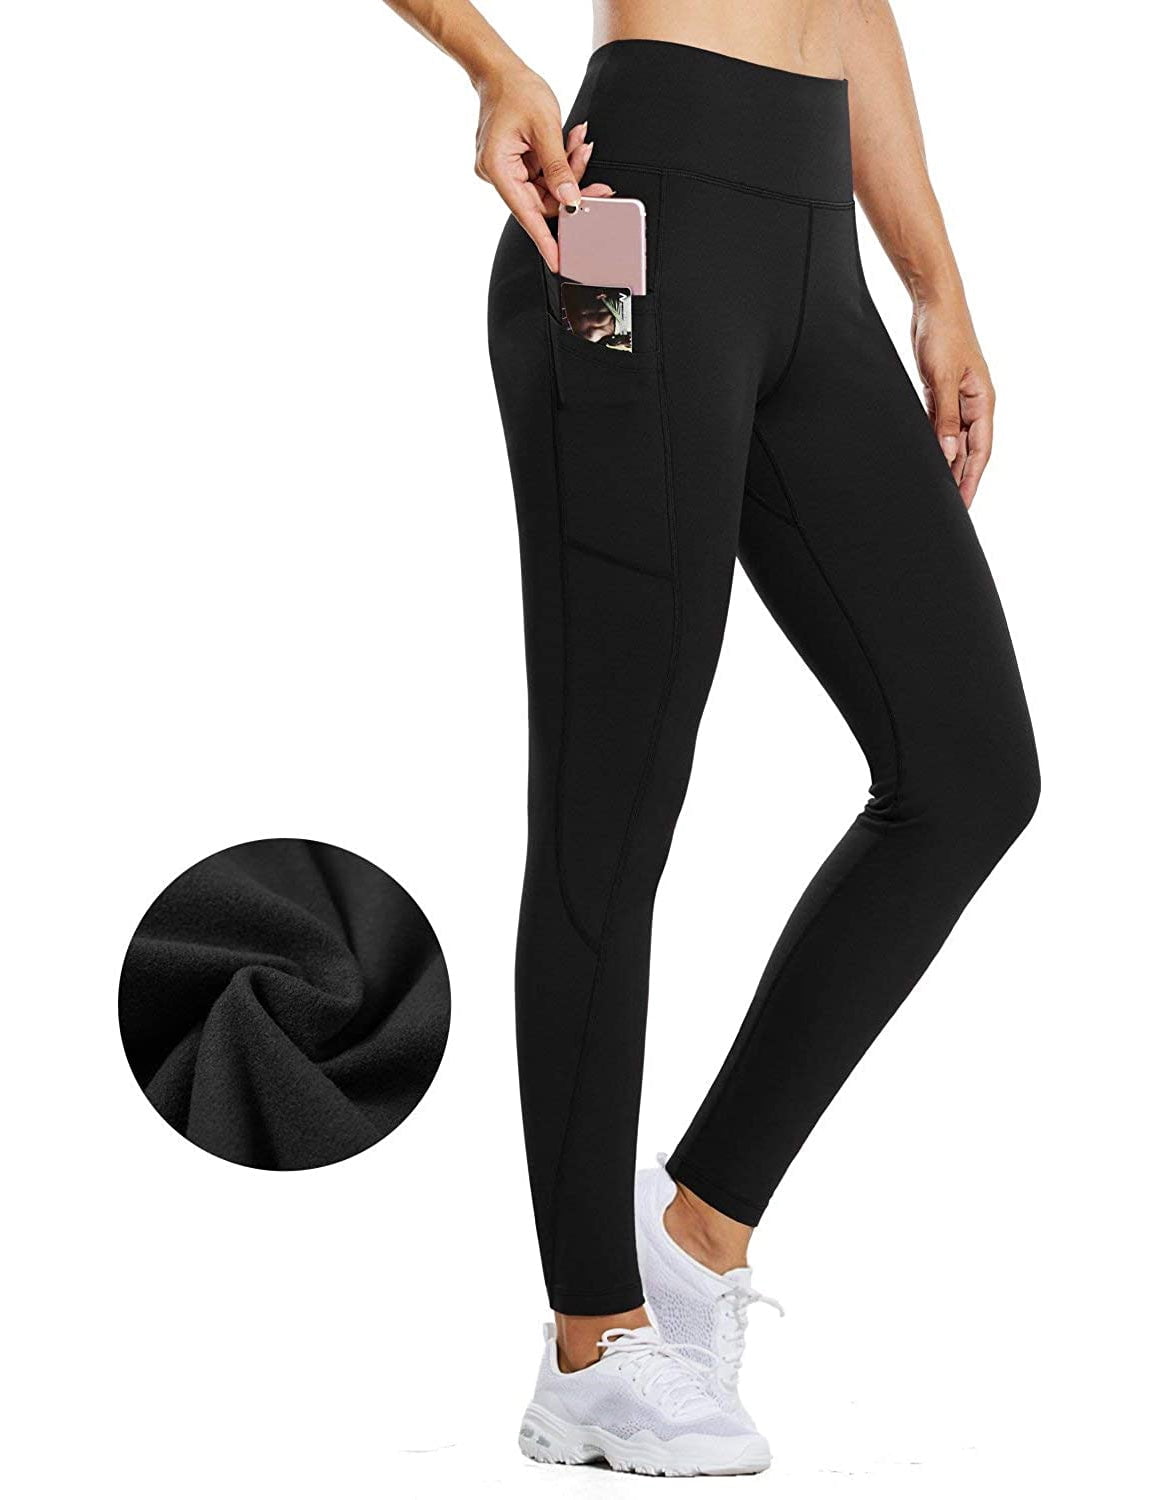 Women Thermal Stretch Fleece Lined Thick Winter Warm Pants Casual tight  leggings | eBay